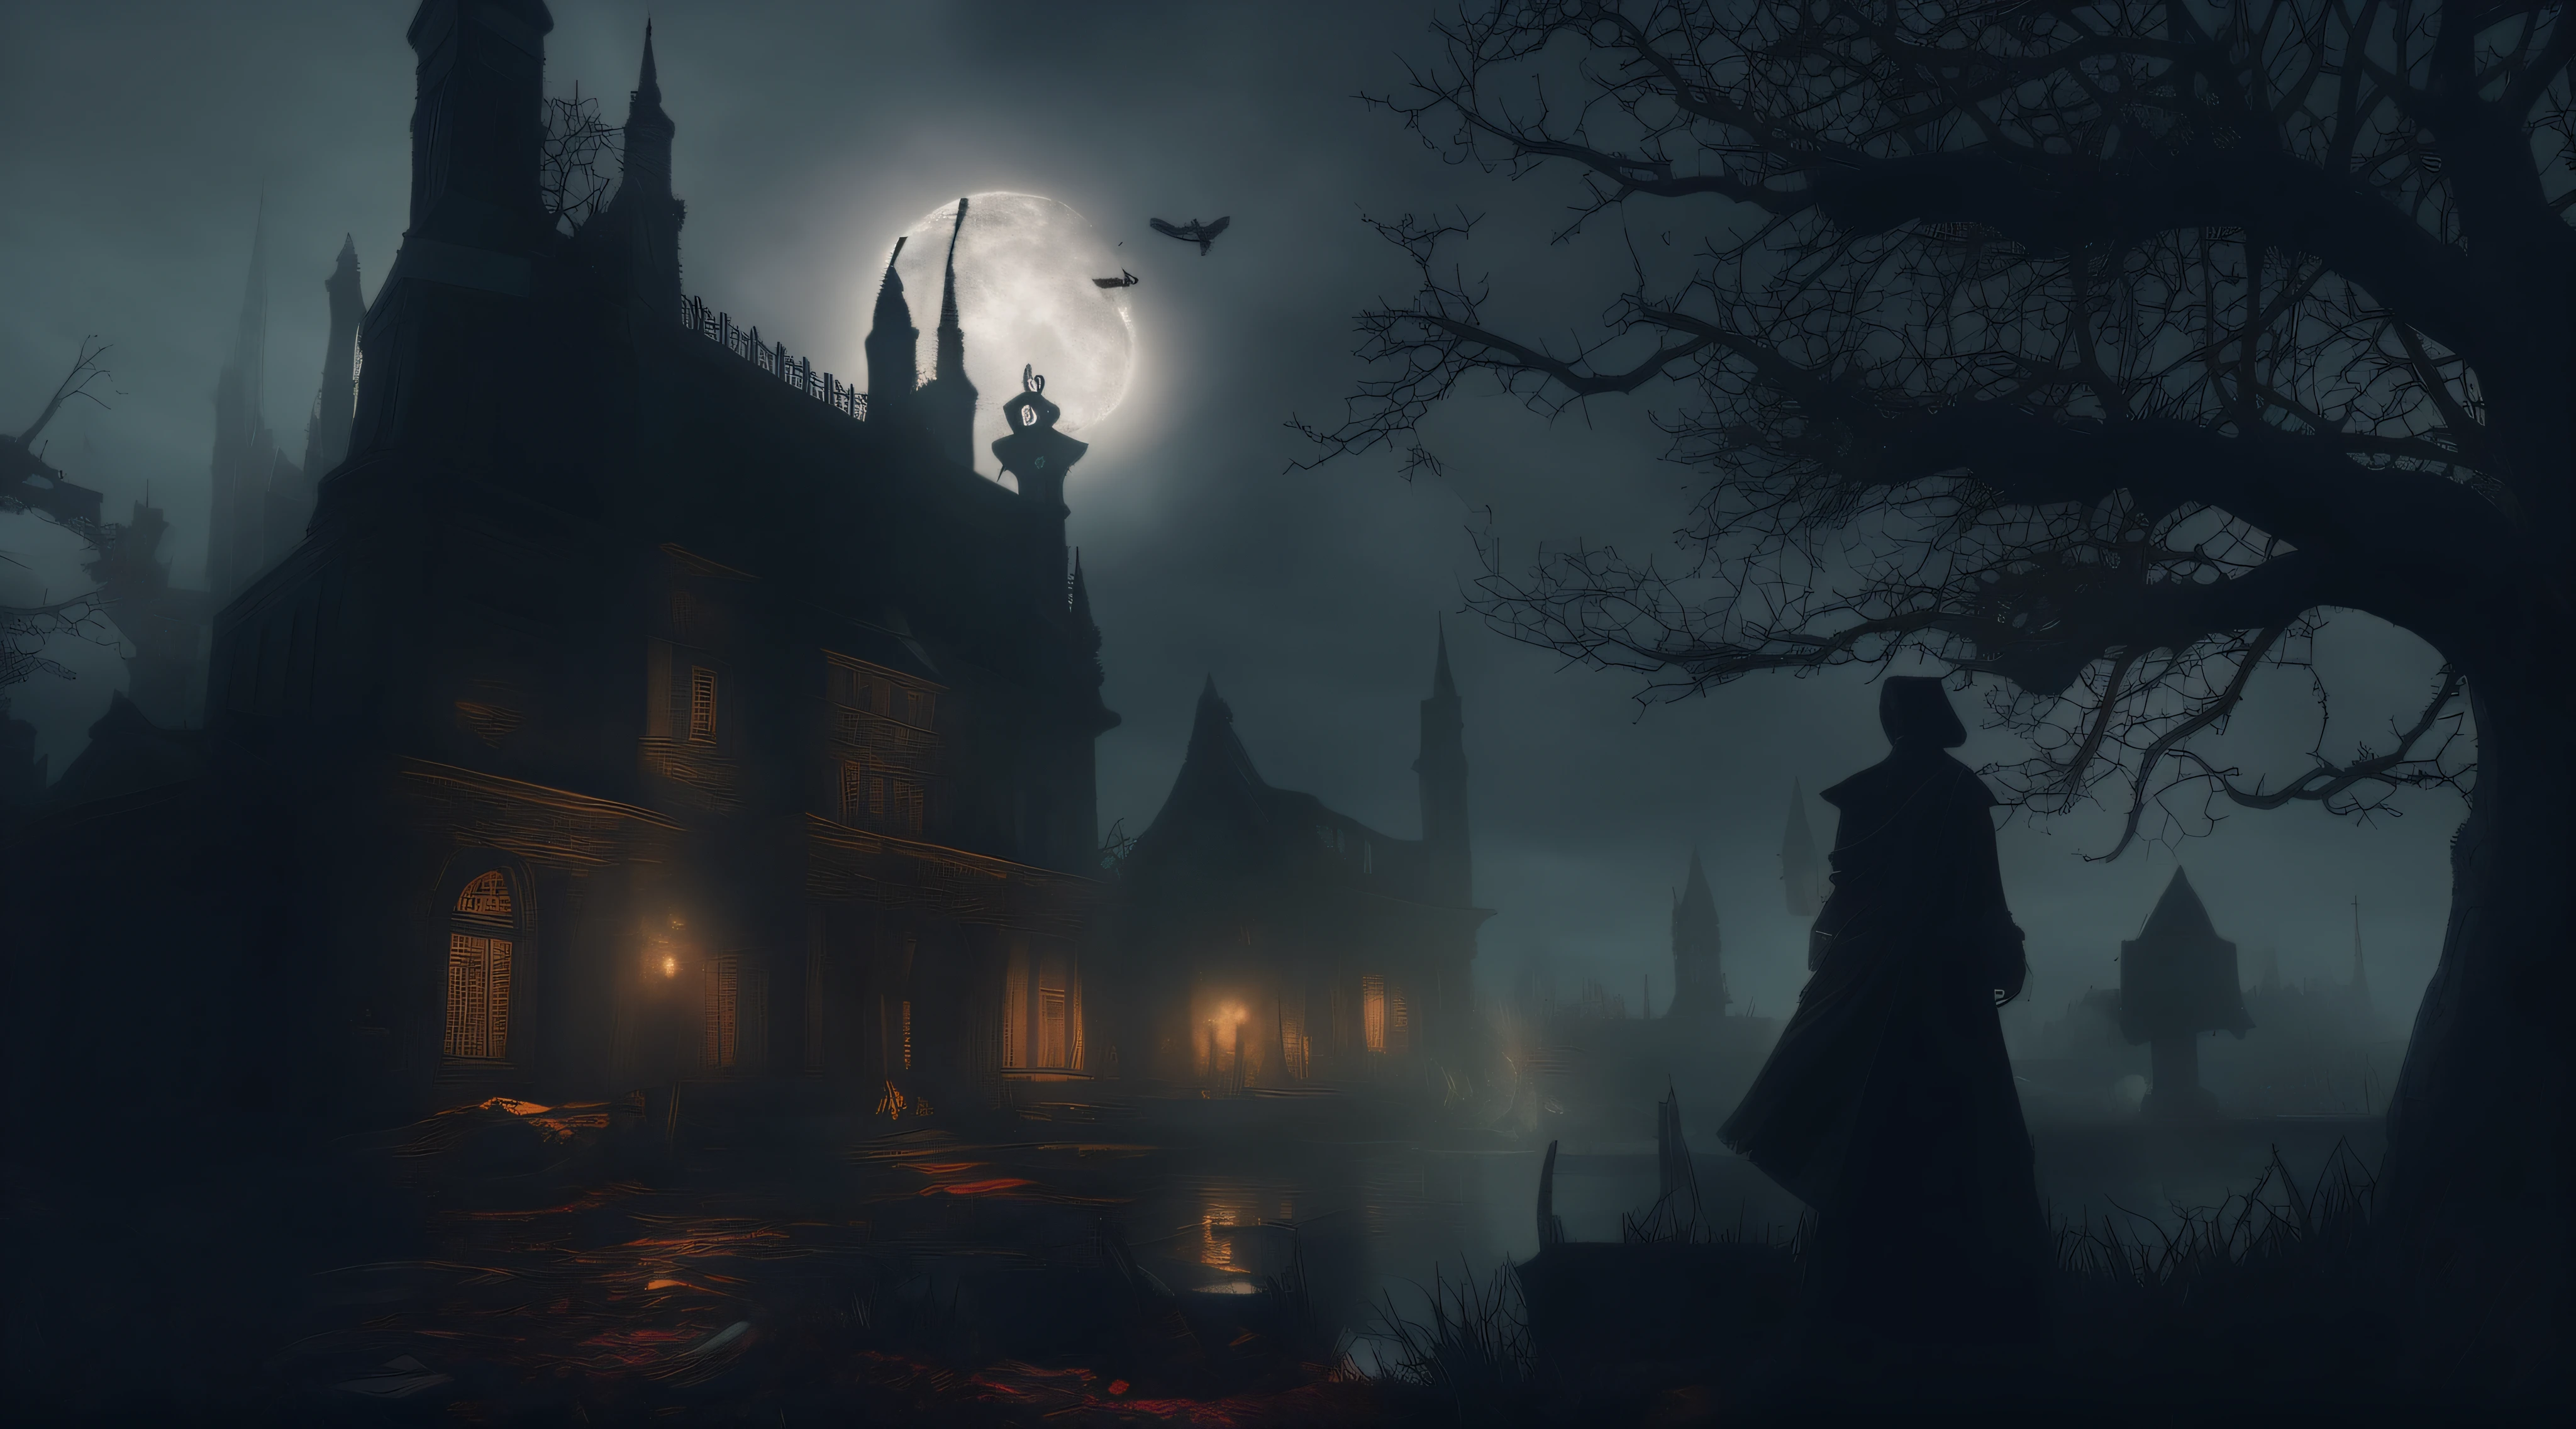 bloodborne style，Gothic horror art，Hunter characters，Nightmare cityscape，Eldridge Bio，Moonshine environment，Victorian fantasy，Dynamic perspective，over the shoulder view，Moonlight silhouette，Spooky landscape，low  angle shot，creepy atmosphera，closeup detailed，Nightmarish scene，chies